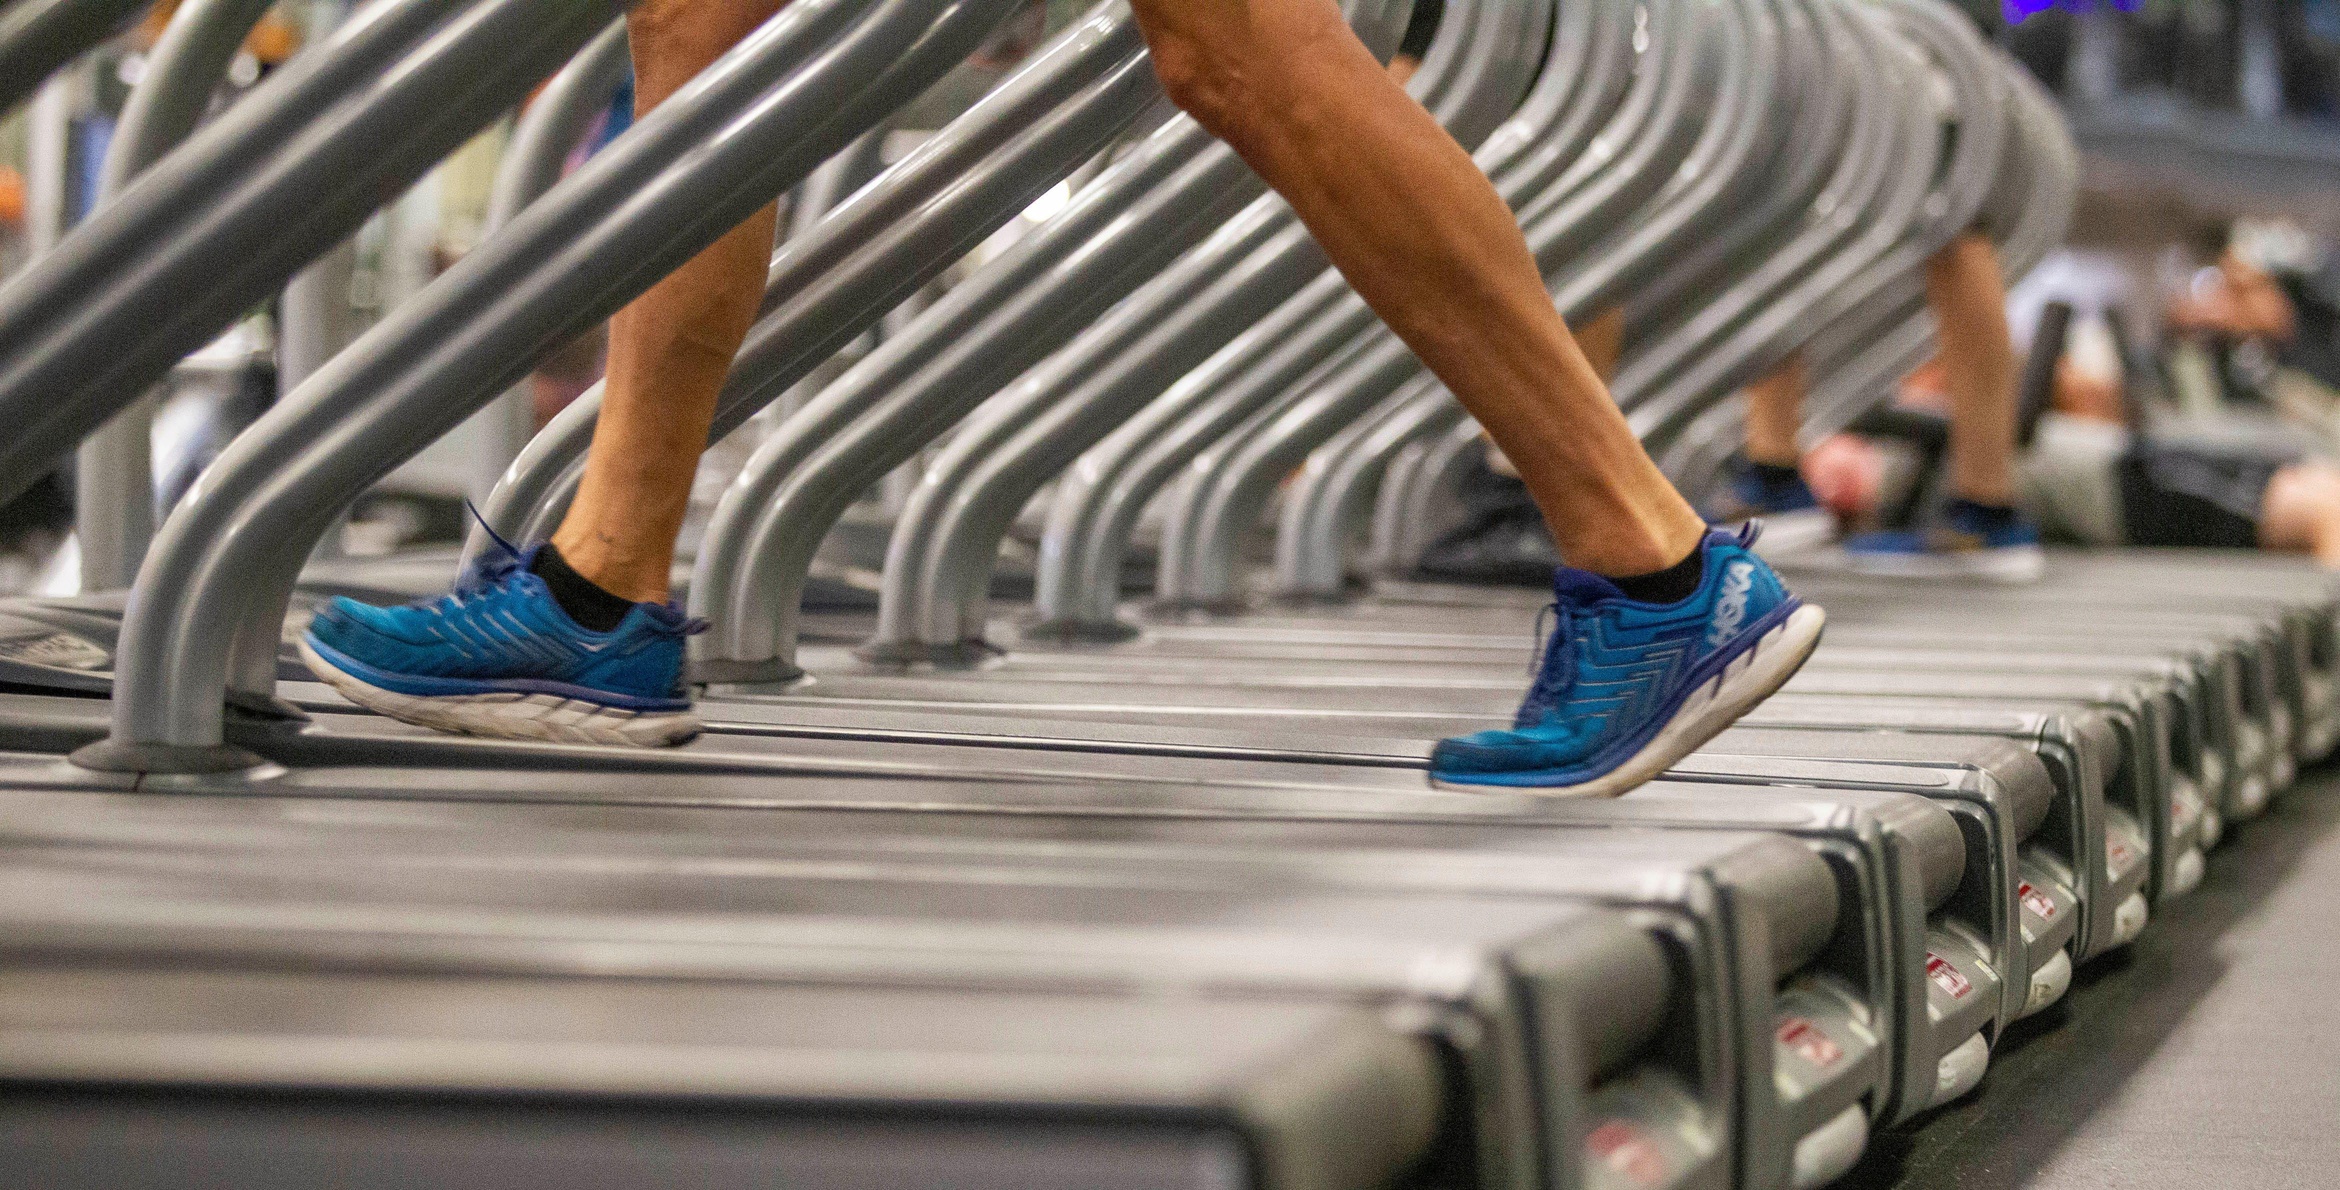 A detail view of someone walking on a treadmill.